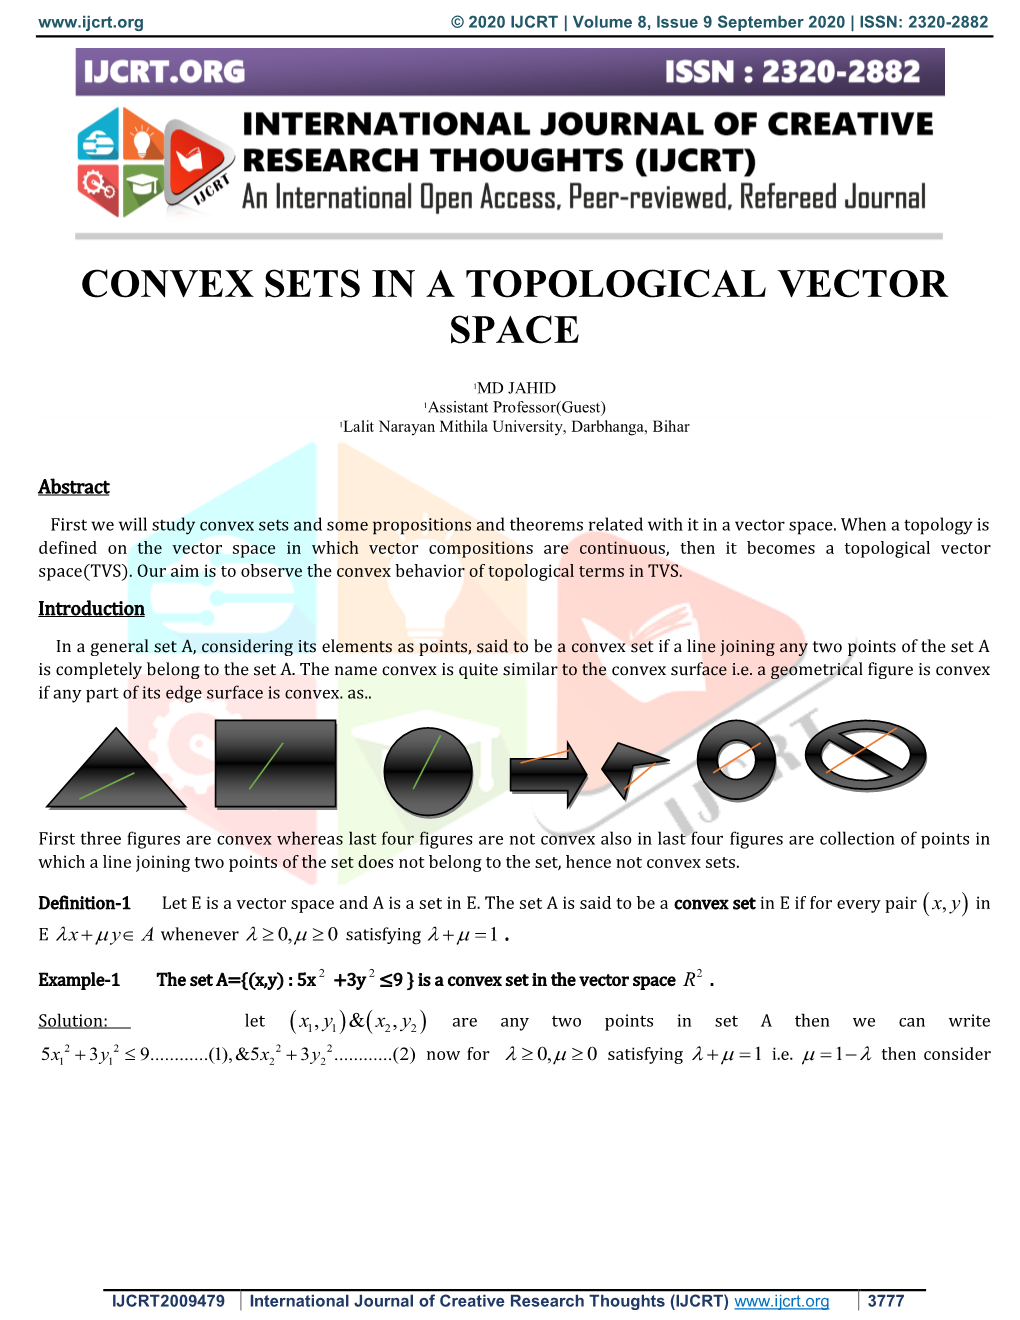 Convex Sets in a Topological Vector Space